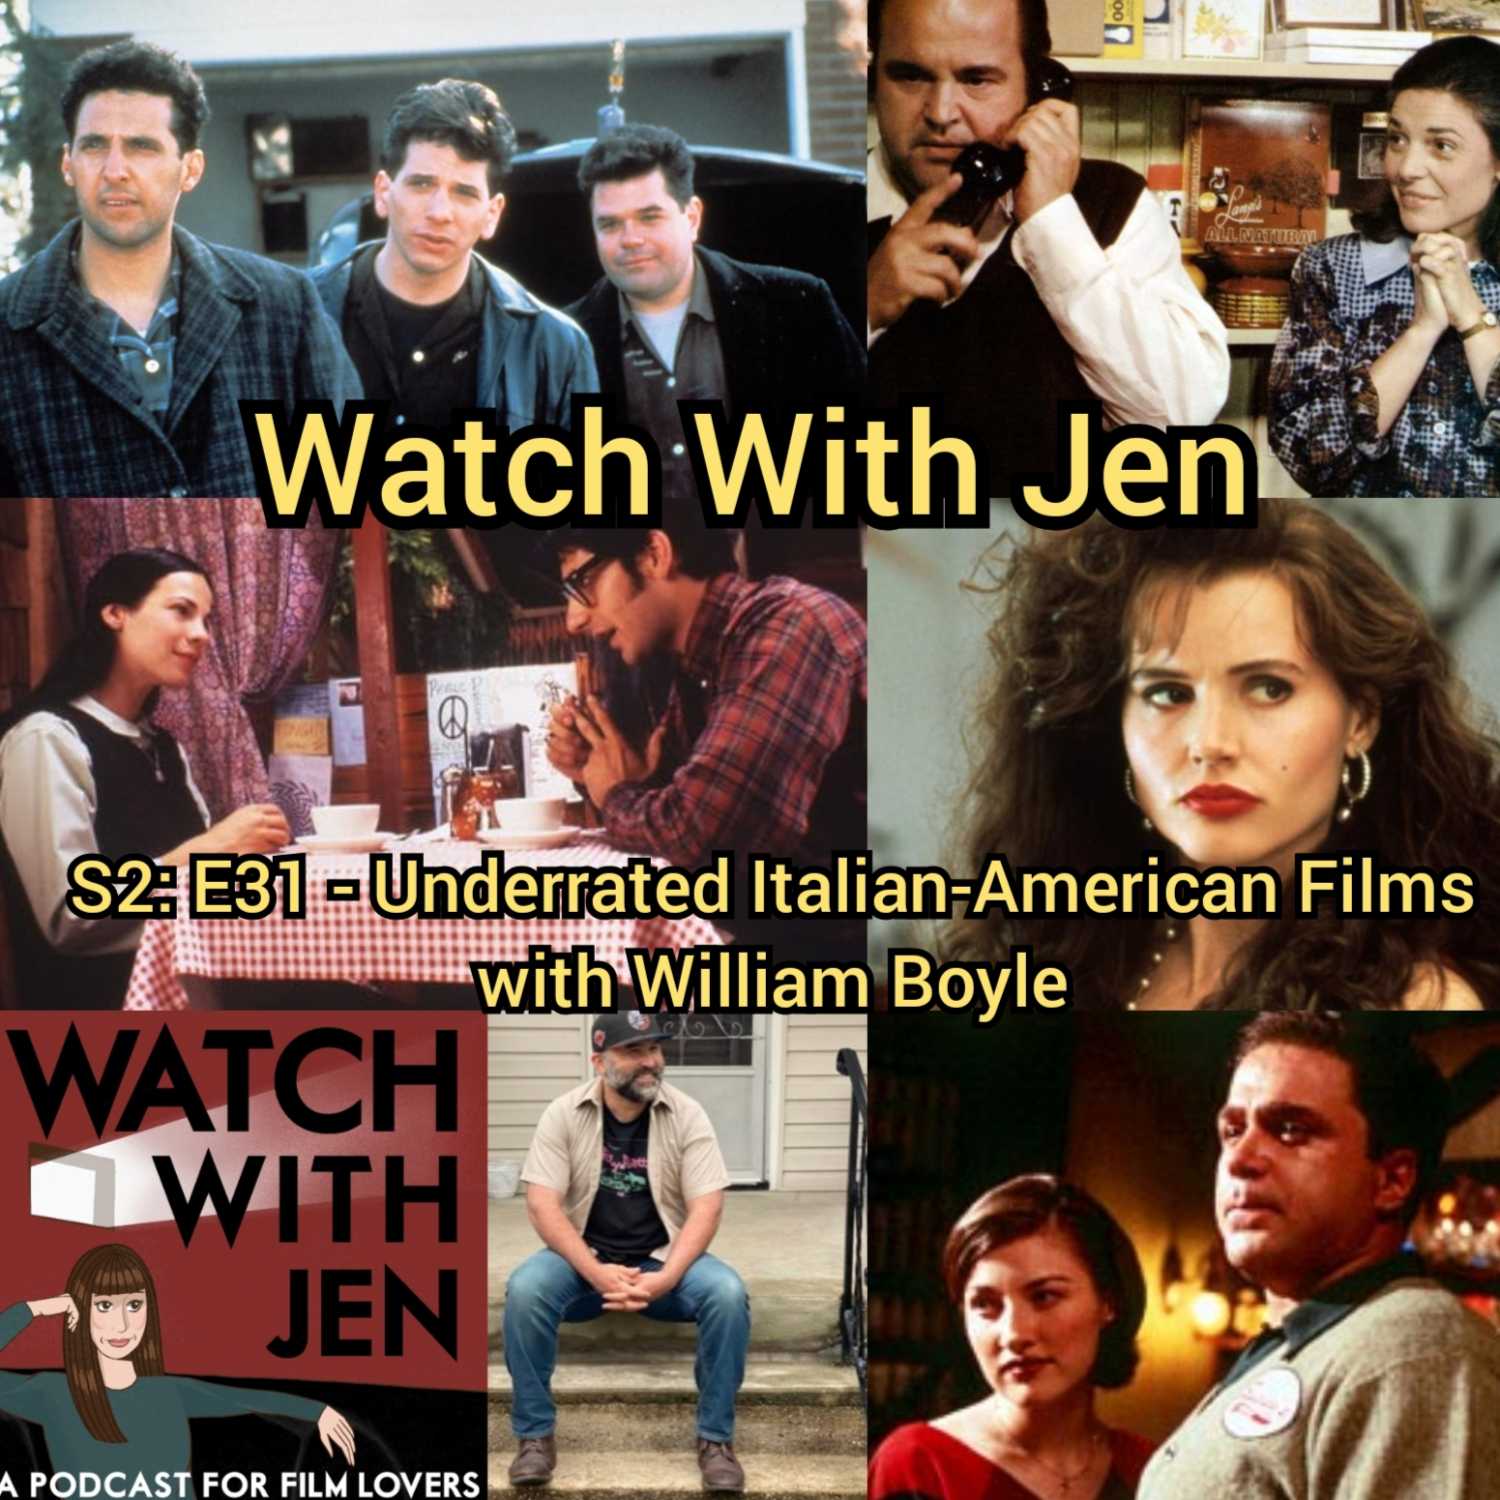 Watch With Jen - S2: E31 - Underrated Italian-American Films with William Boyle